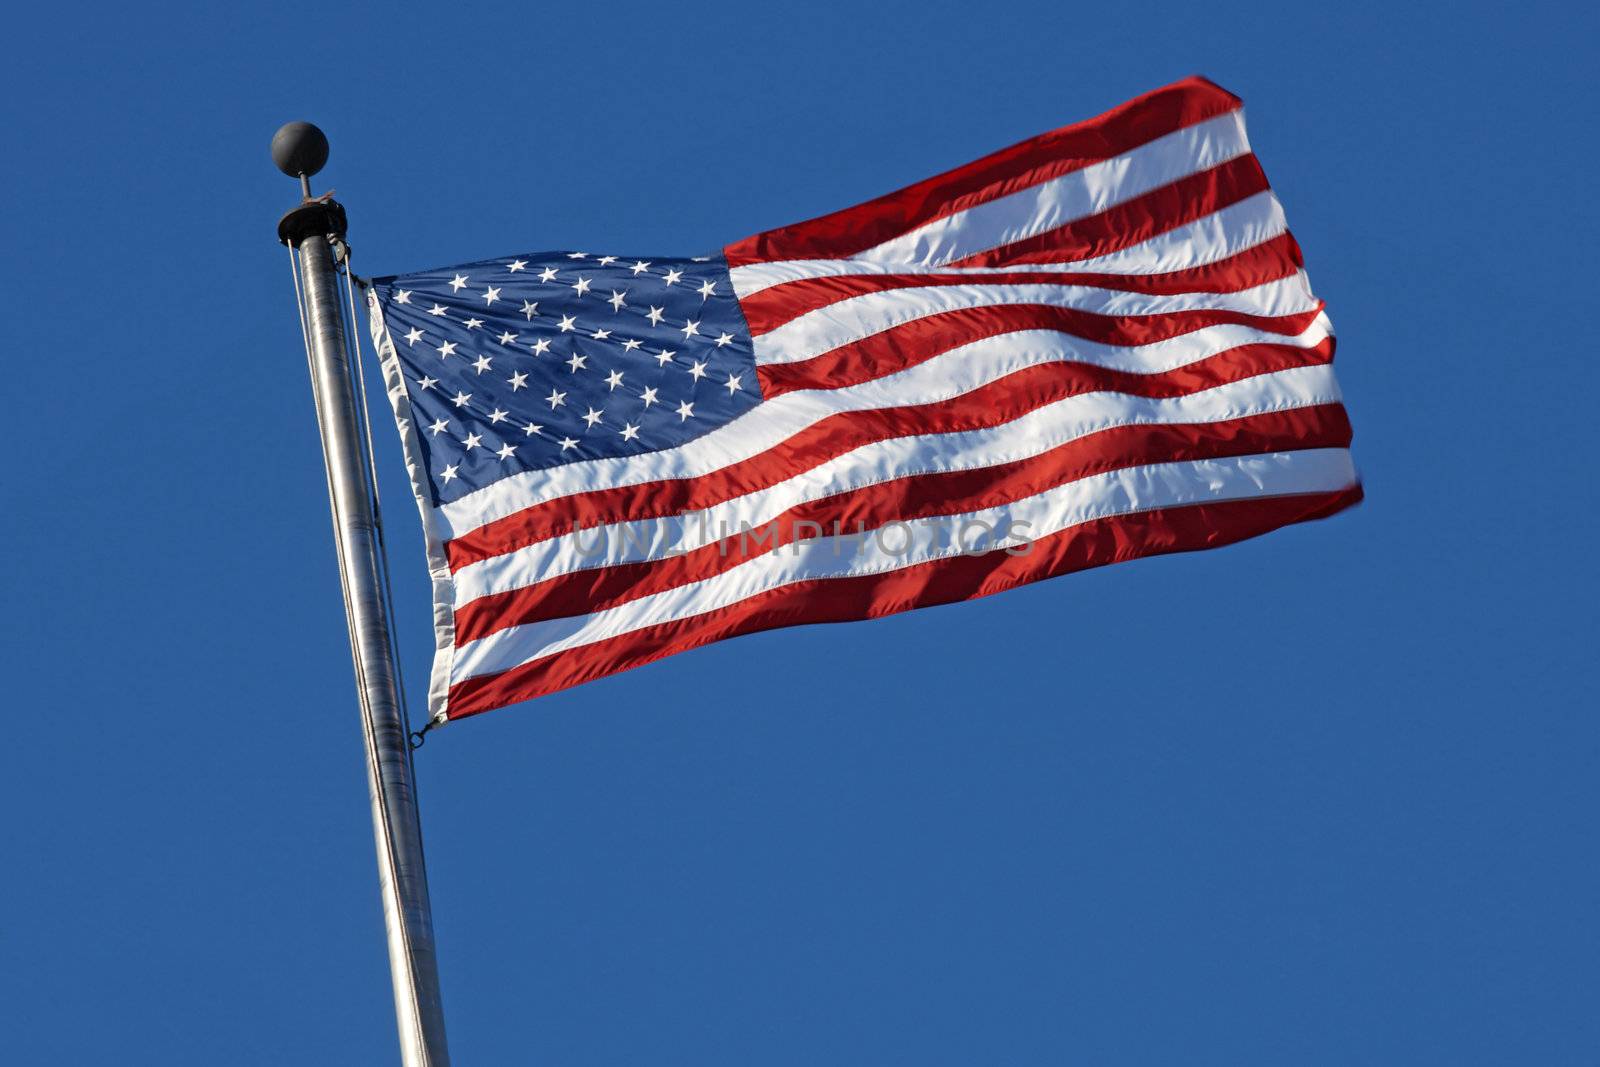 Photo of the American flag blowing in the wind.